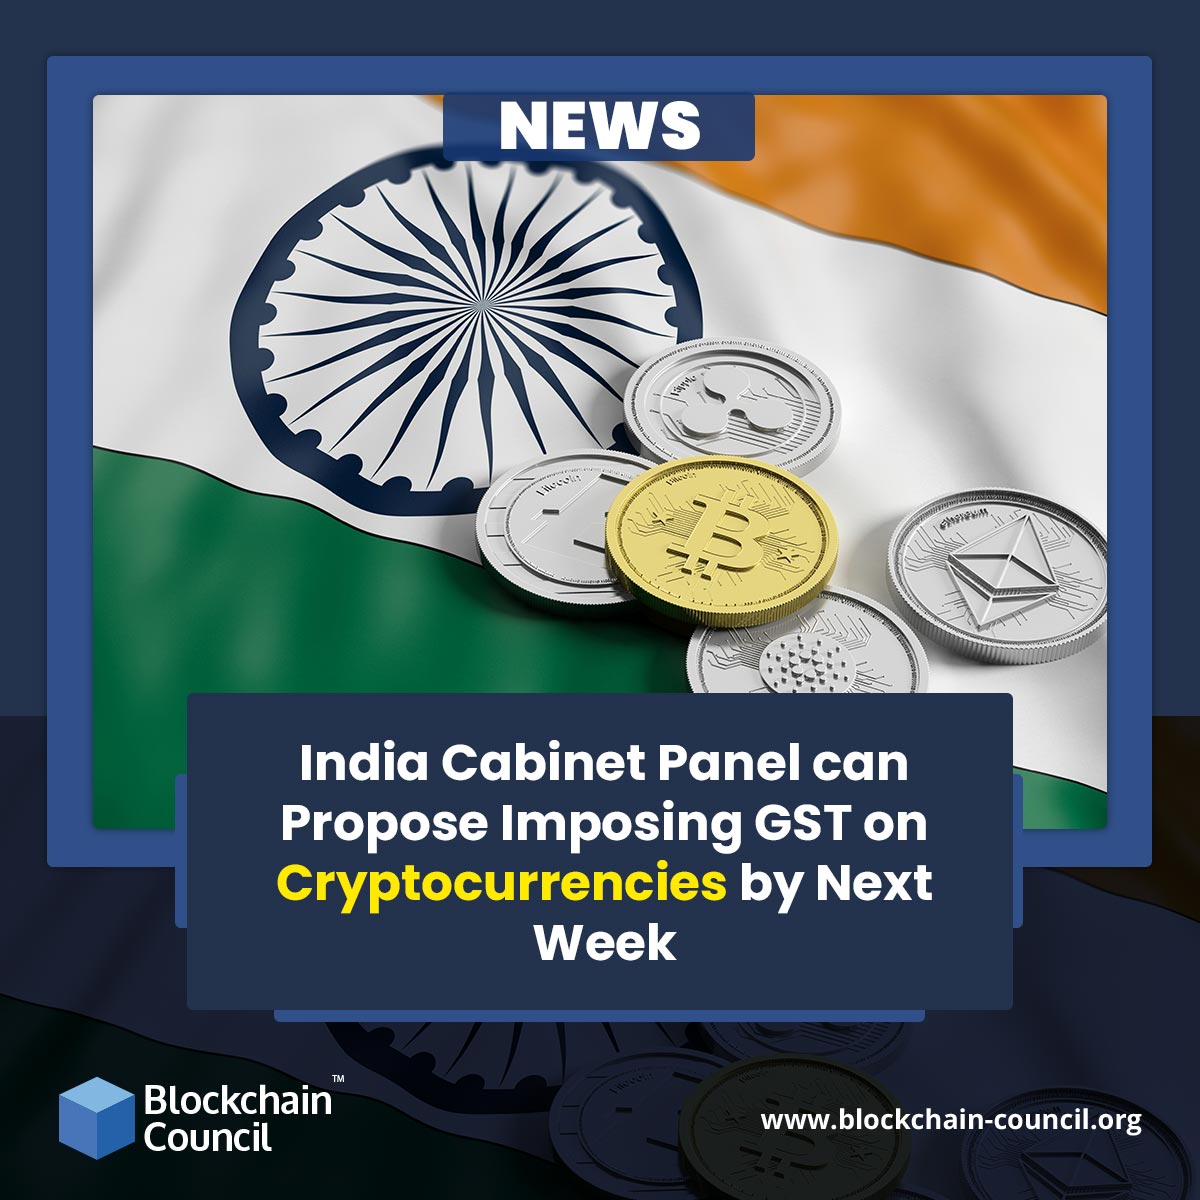 India Cabinet Panel can Propose Imposing GST on Cryptocurrencies by Next Week 